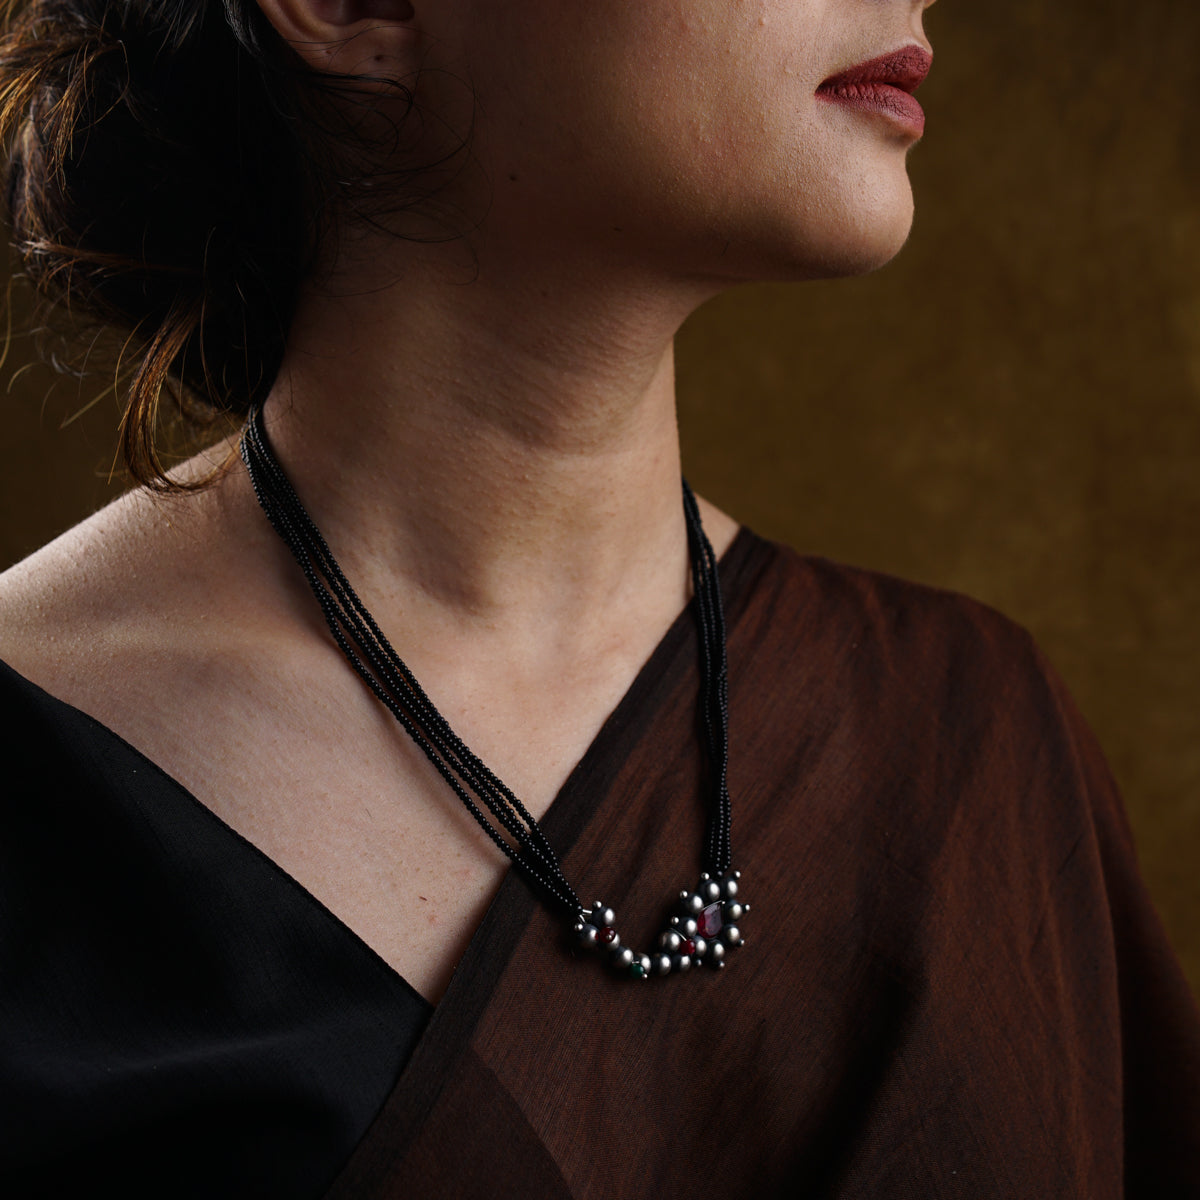 a woman wearing a brown shirt and a black necklace